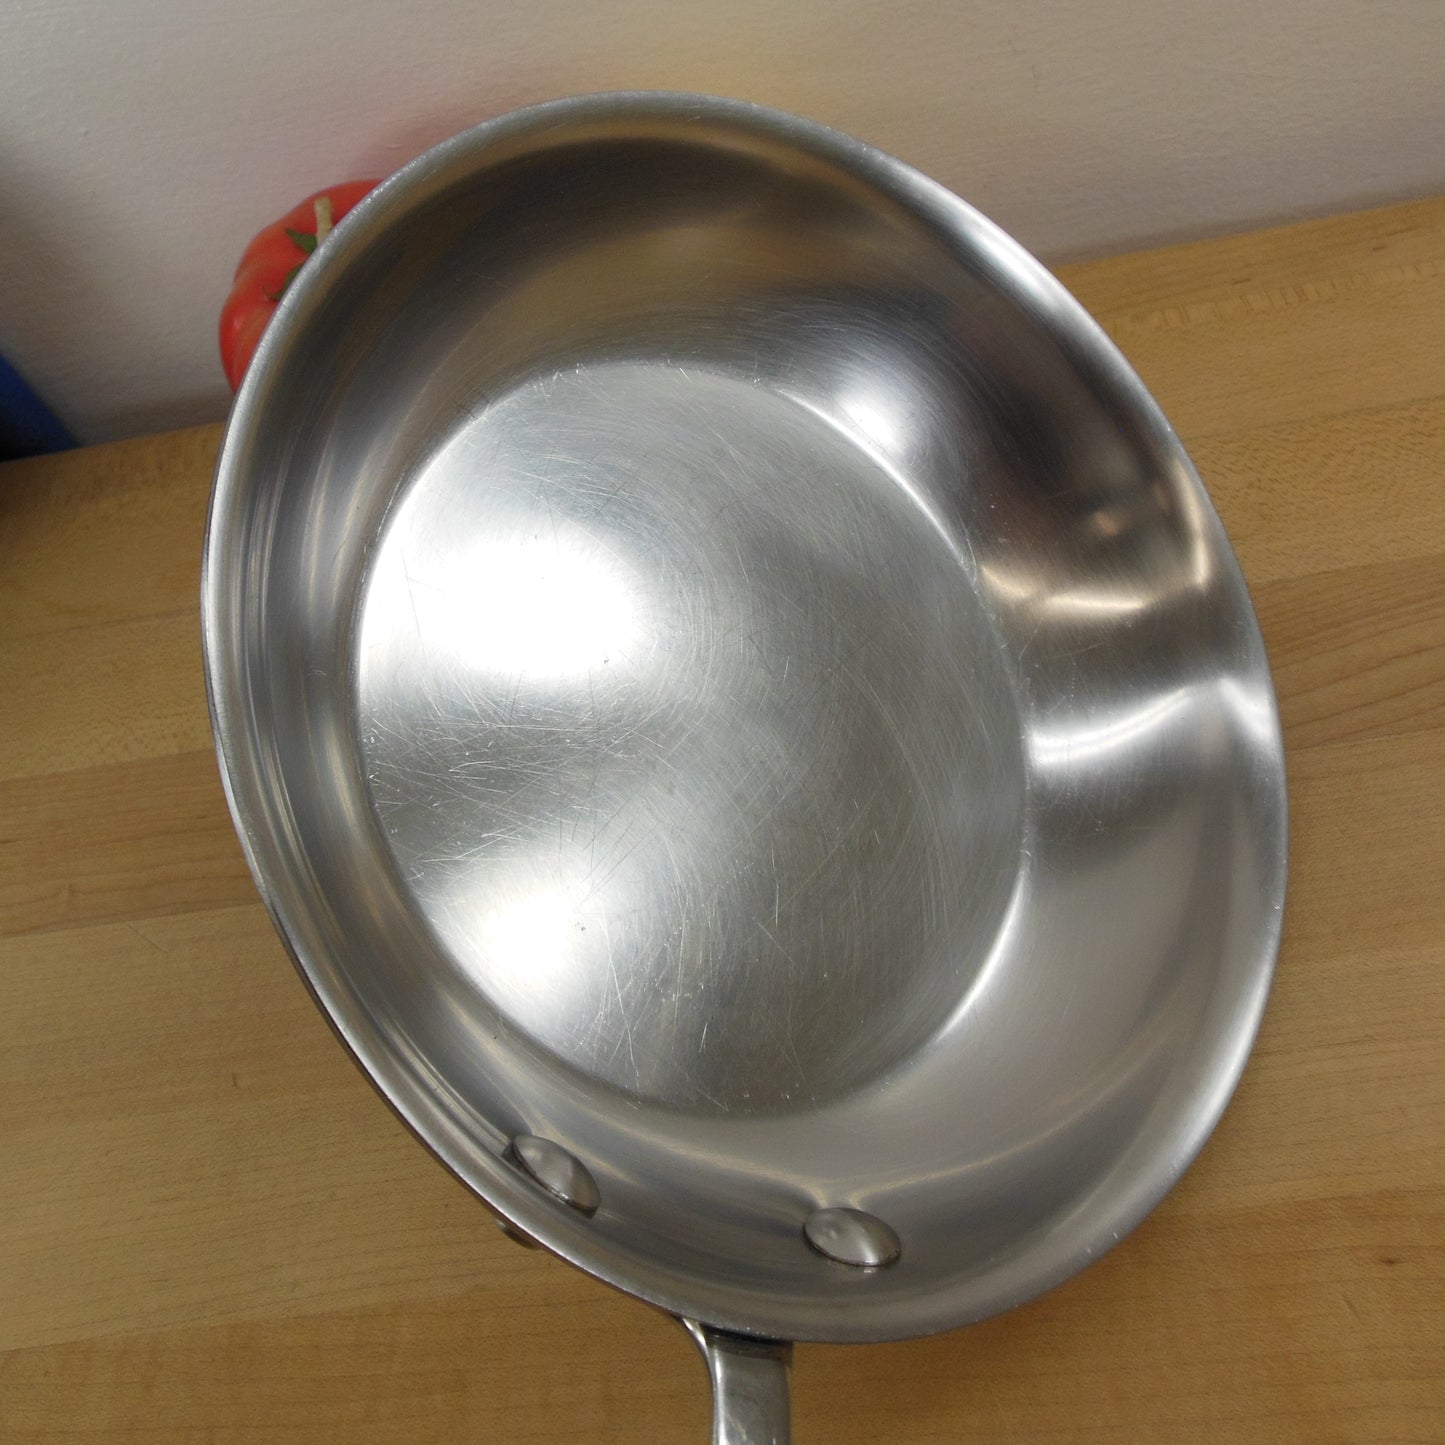 All-Clad USA Stainless Tri-Ply 7.5" Fry Pan Skillet Cleaned